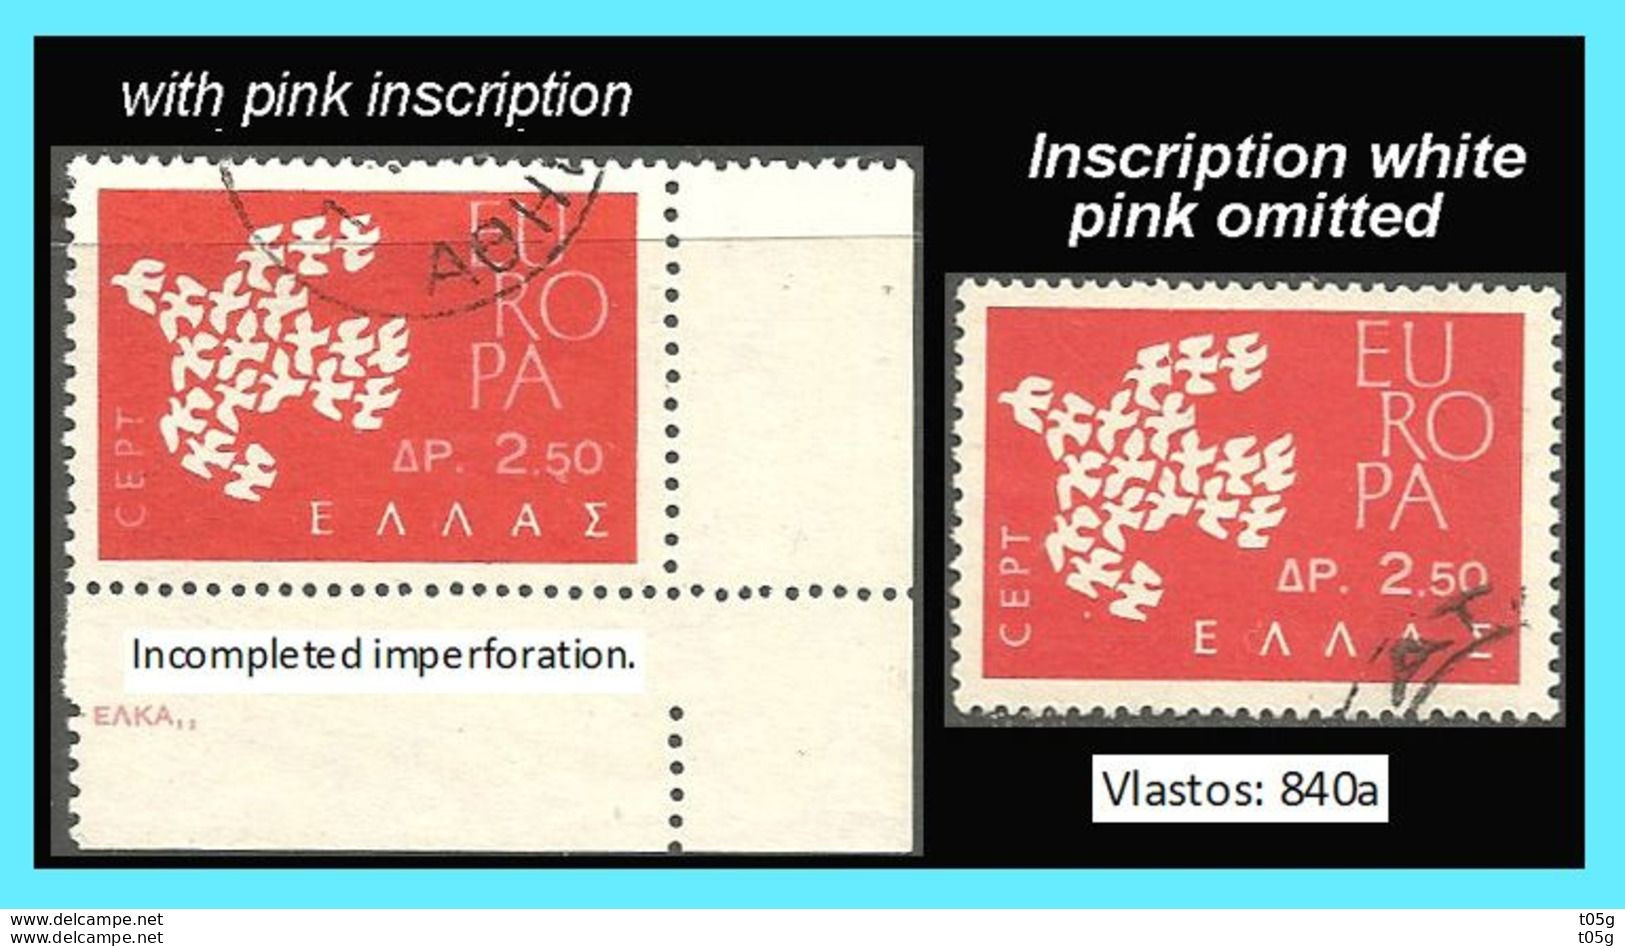 GREECE- GRECE - HELLAS - EUROPA CEPT 1961: 2.50drx Inscription White, Pink Omitted Used - Usati